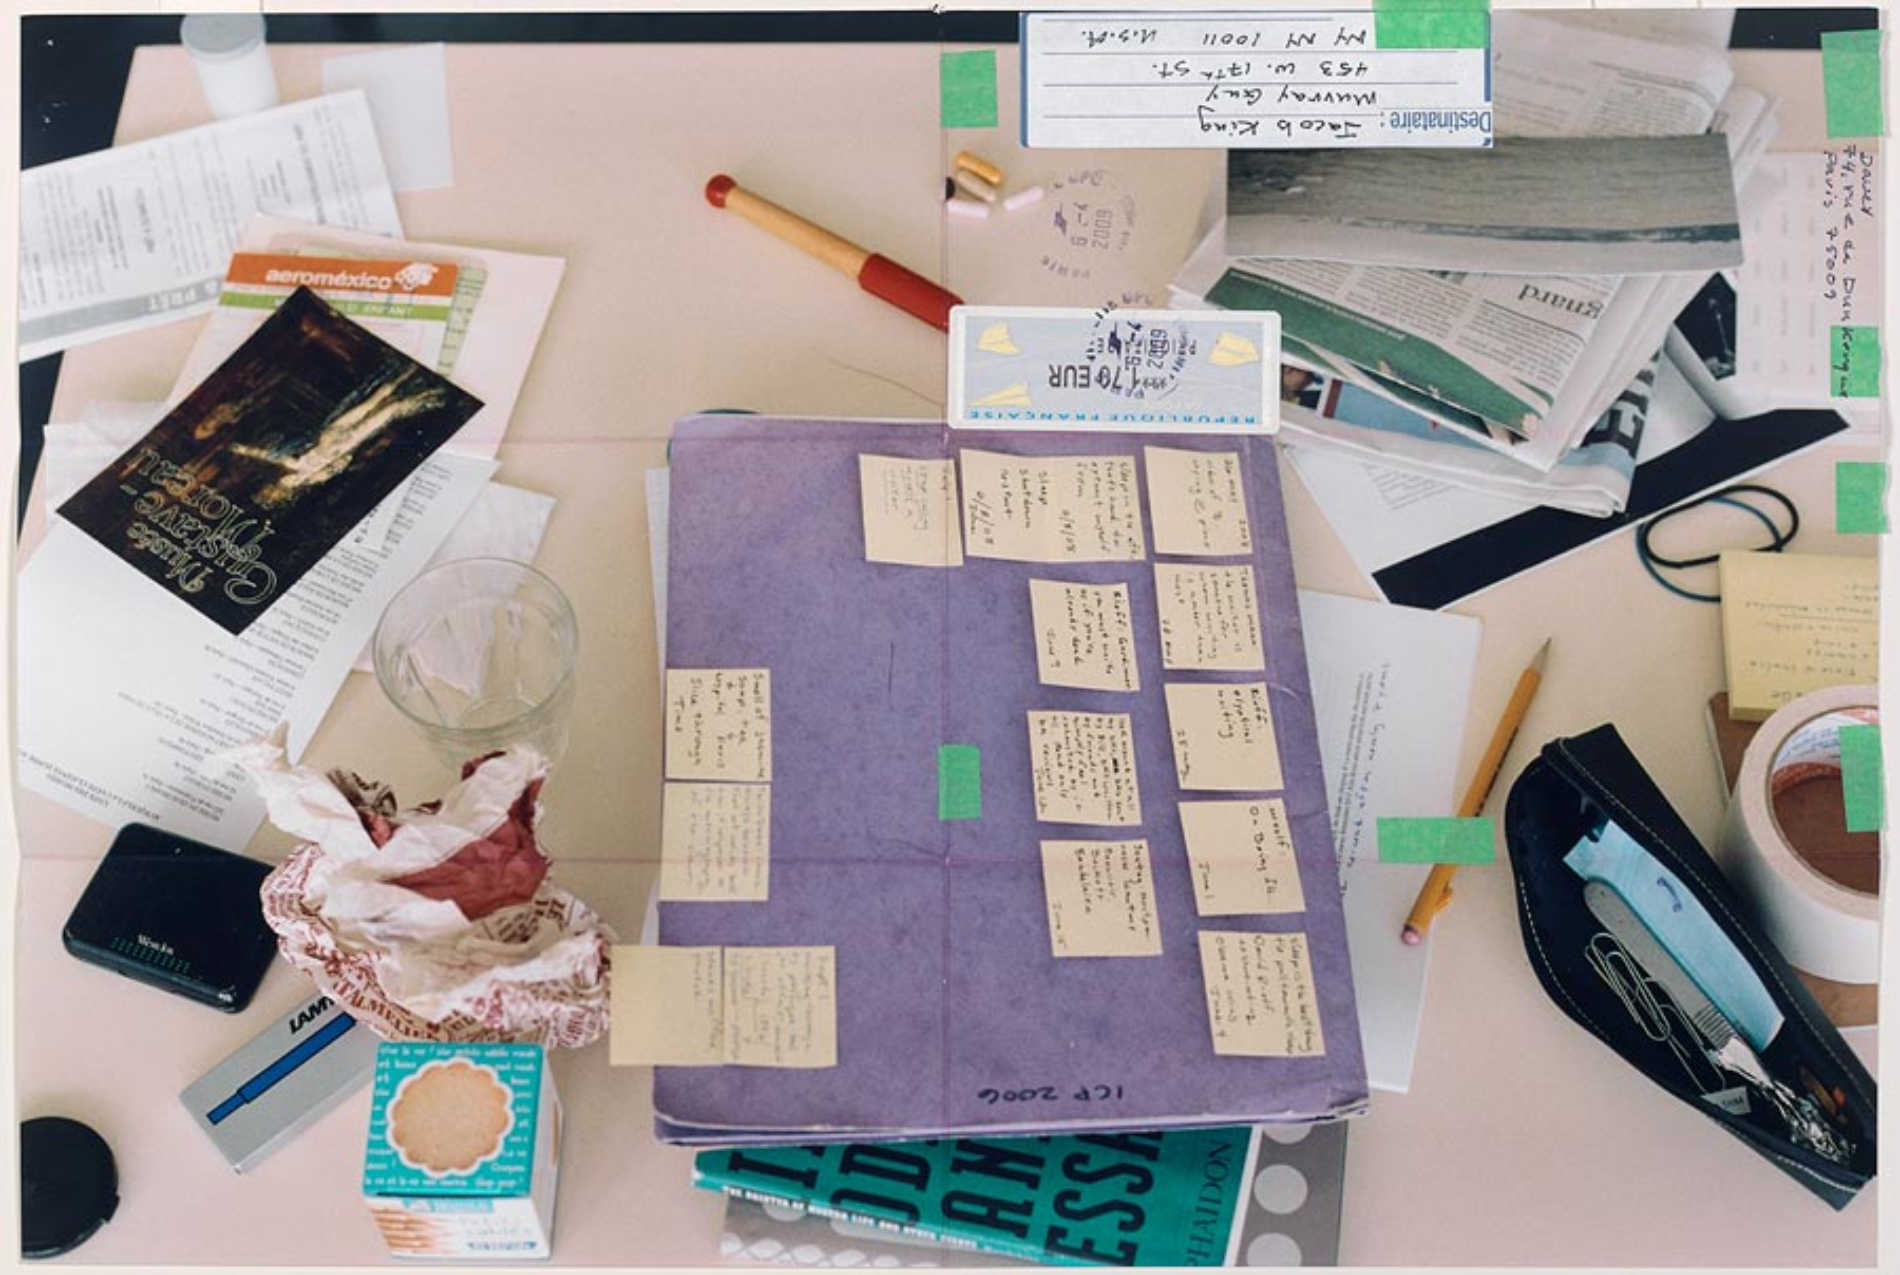 Close-up of table top with piles of papers, crumpled paper, purple file folder covered in small yellow post-it notes, empty glass, newspaper, subway card, masking tape, two rubber bands, pen and mechanical pencil, and Musee Gustave Moreau ticket; bits of tape and cancelled stamps, addressed to Jacob King / Murray Guy / 453 W. 17th street / NY NY 10011 / USA from Davey 74, rue de Dunkerque 4 g / Paris 75009